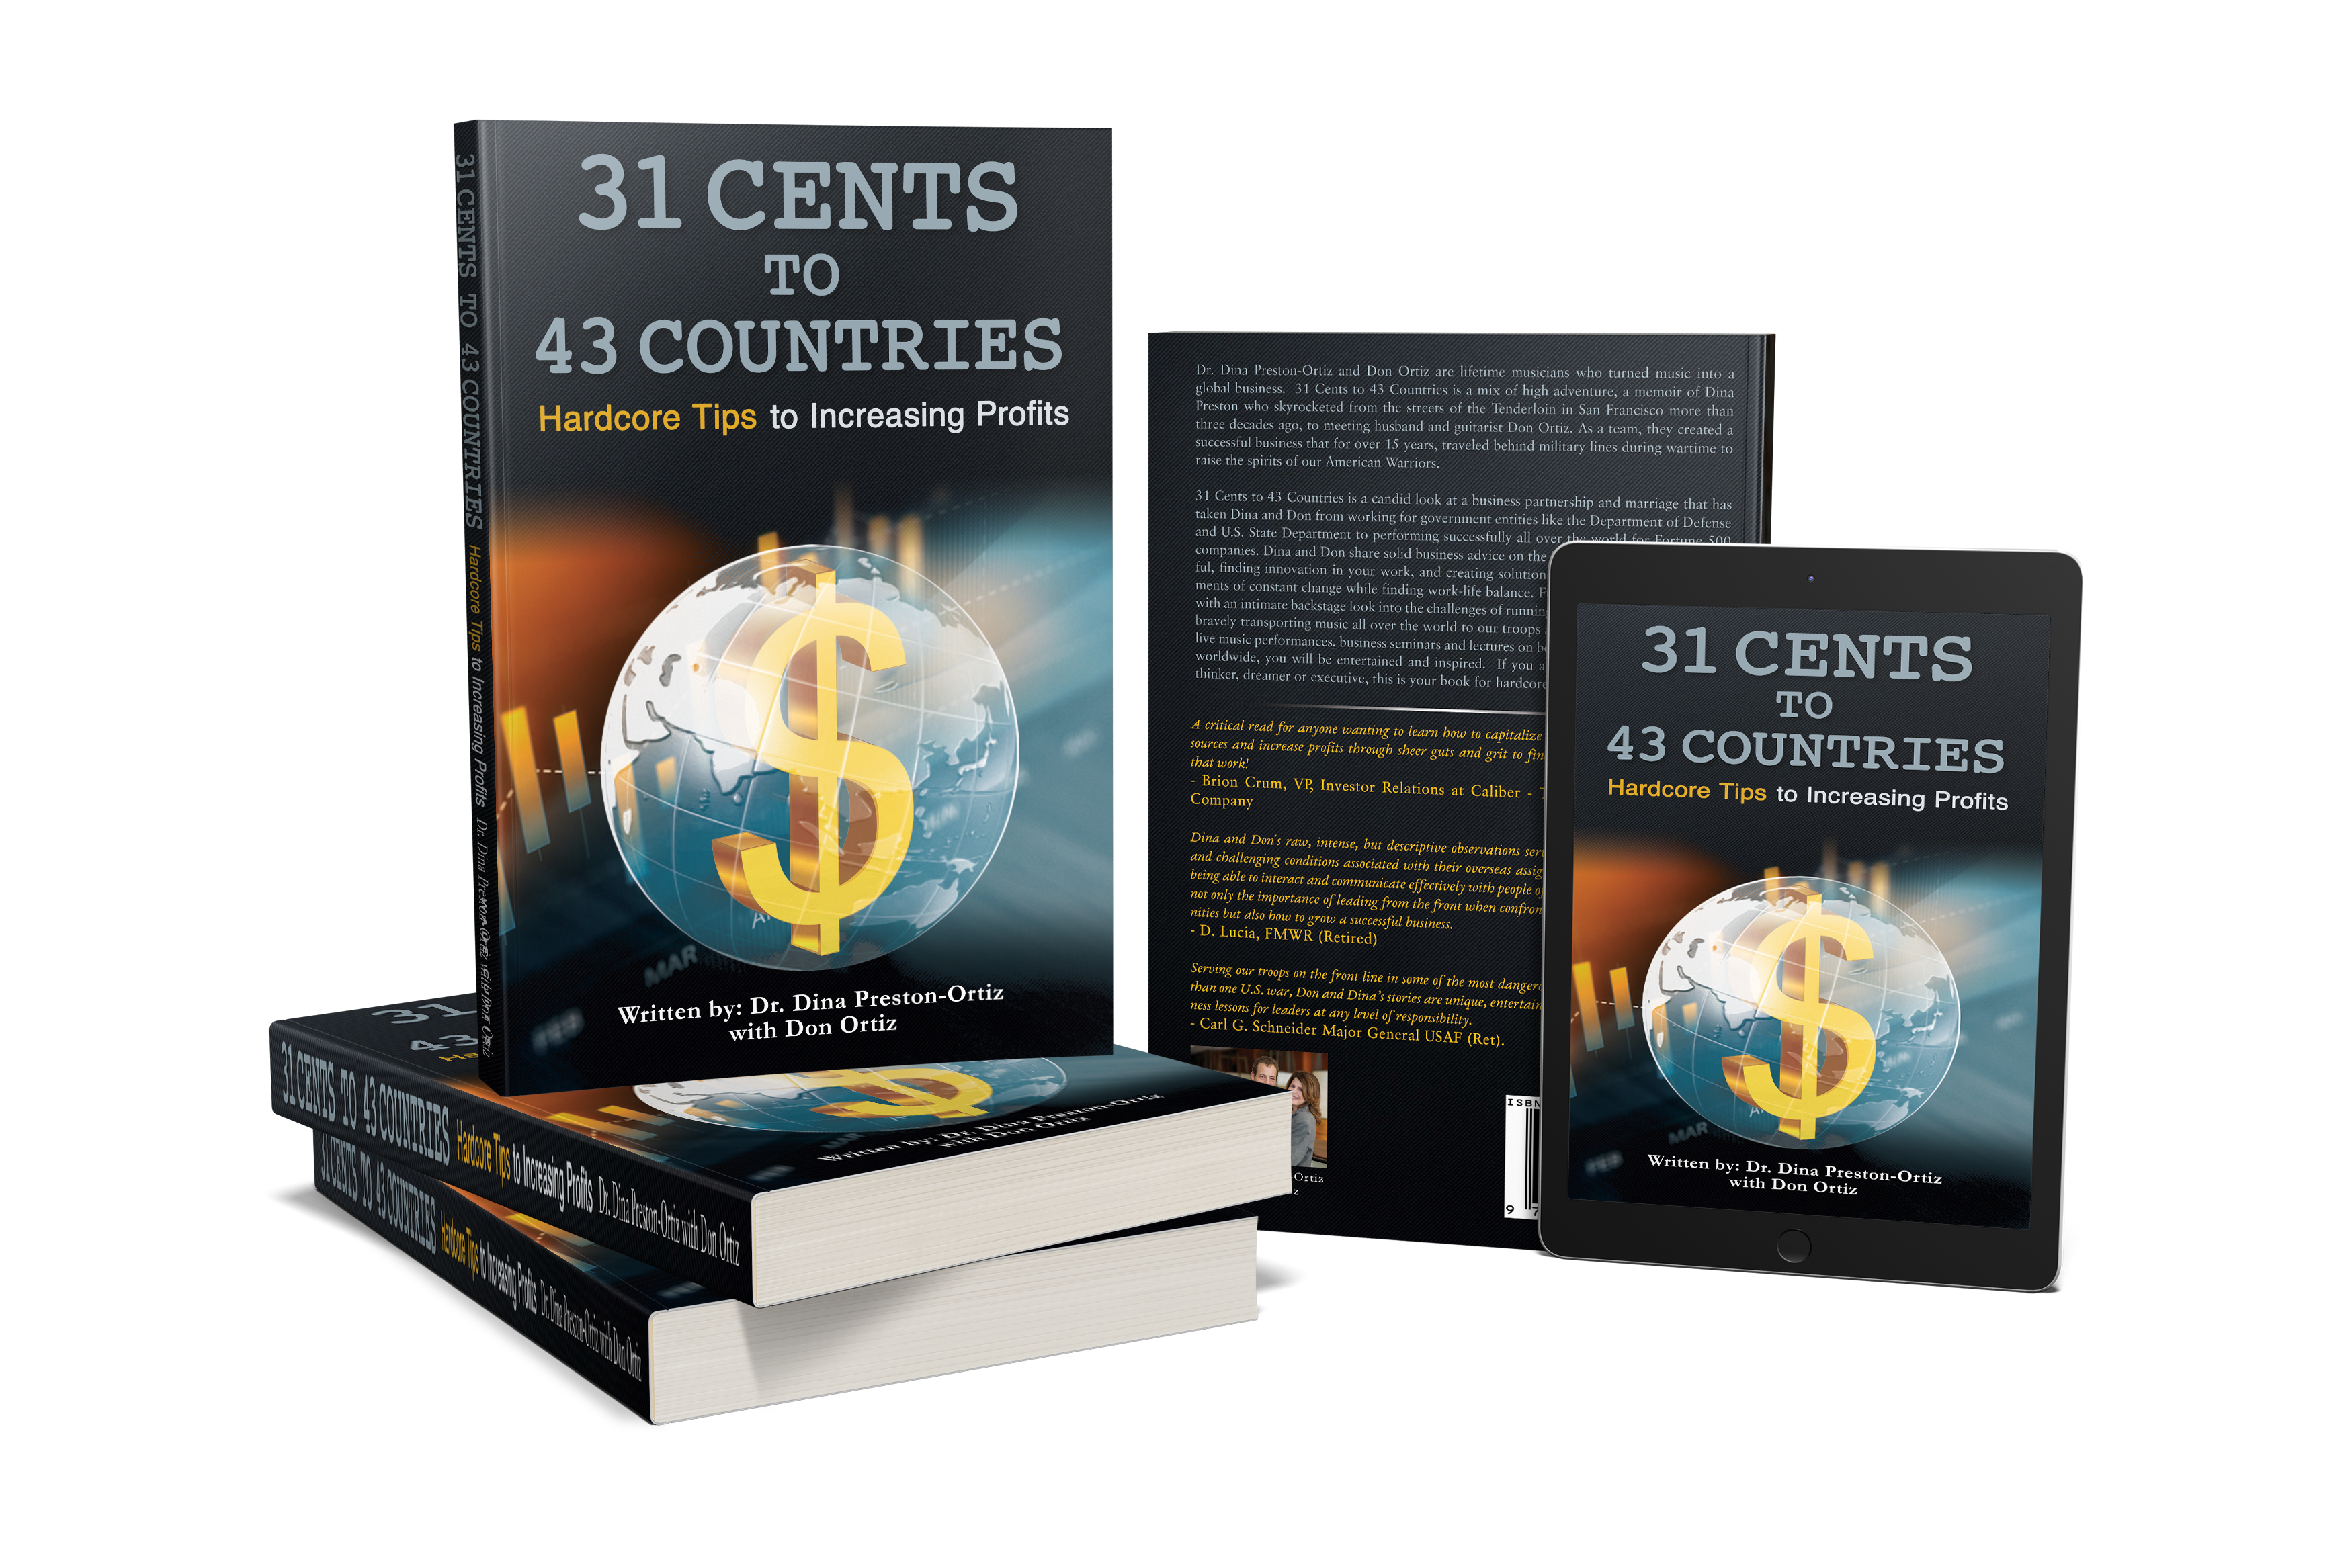 31 cents to 43 countries